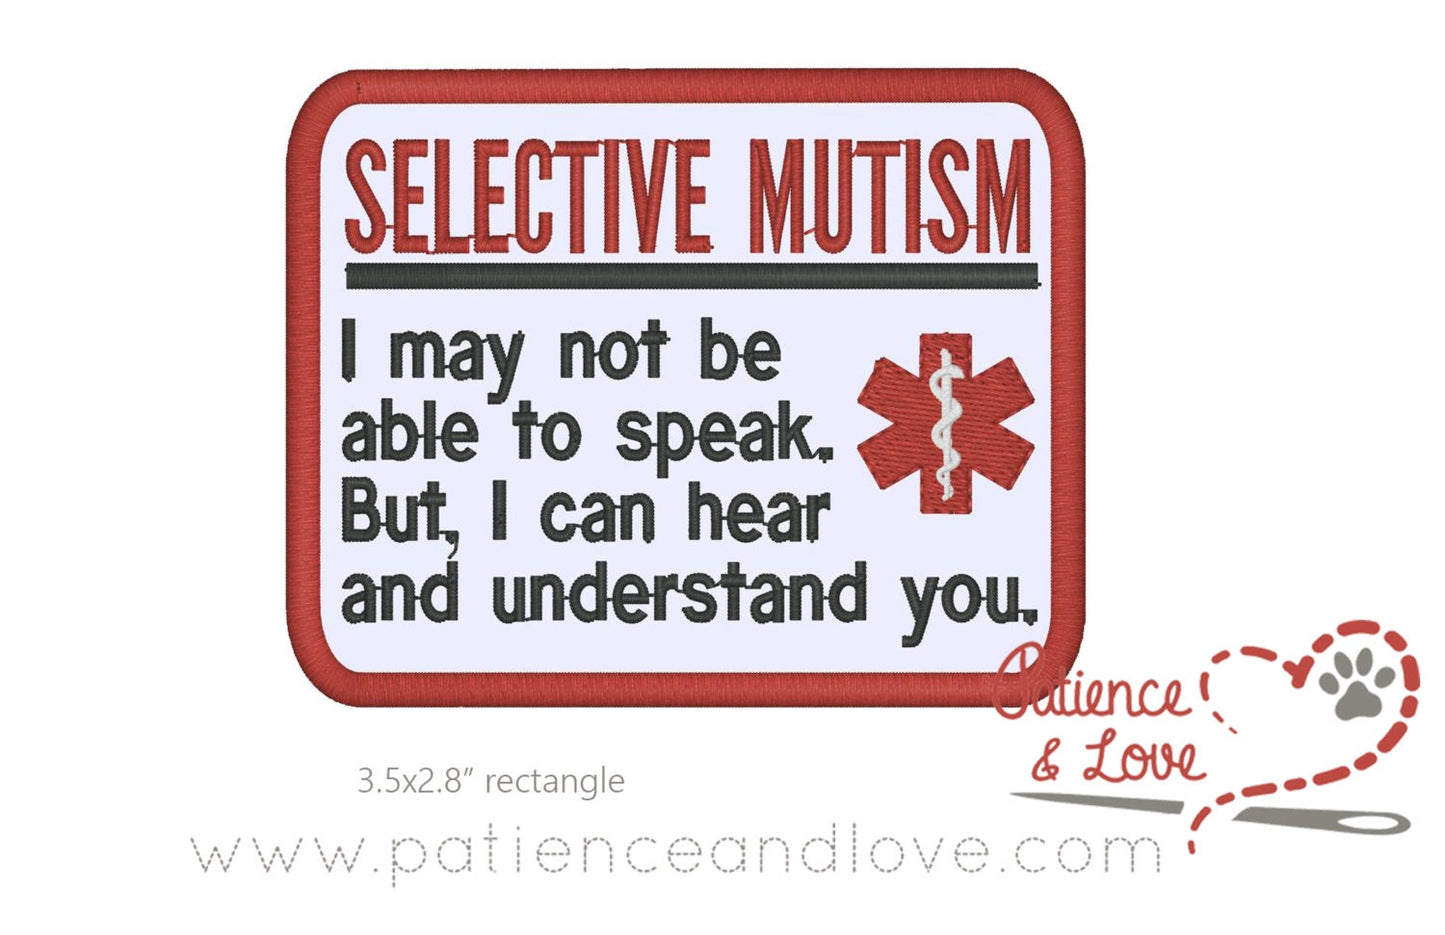 Selective Mutism, I may not be able to speak, but I can hear and understand you, 3.5 x 2.8 inch rectangular patch